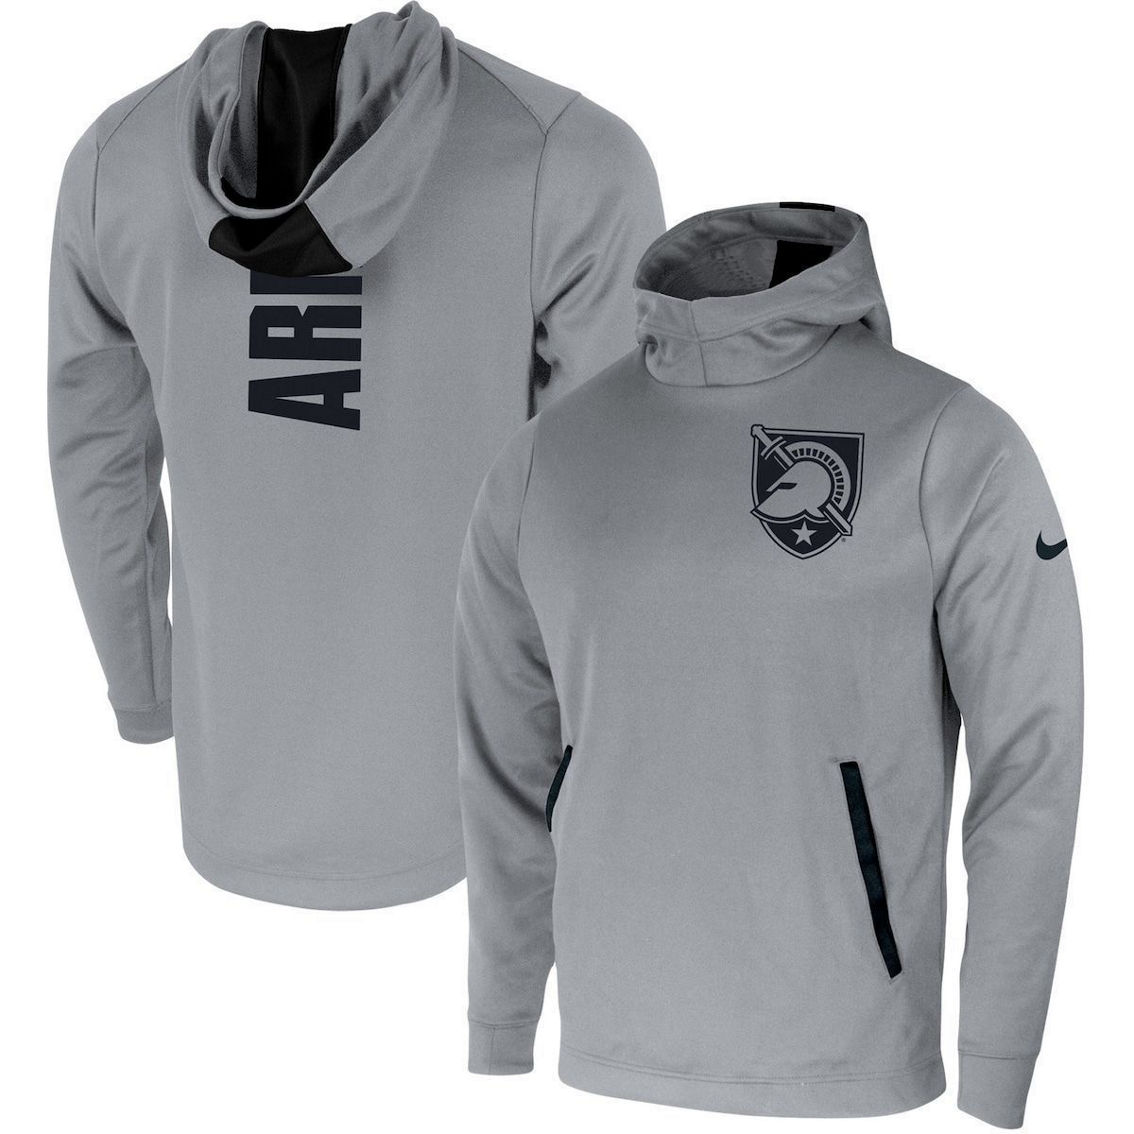 Nike Men's Gray Army Black Knights 2-Hit Performance Pullover Hoodie - Image 2 of 4